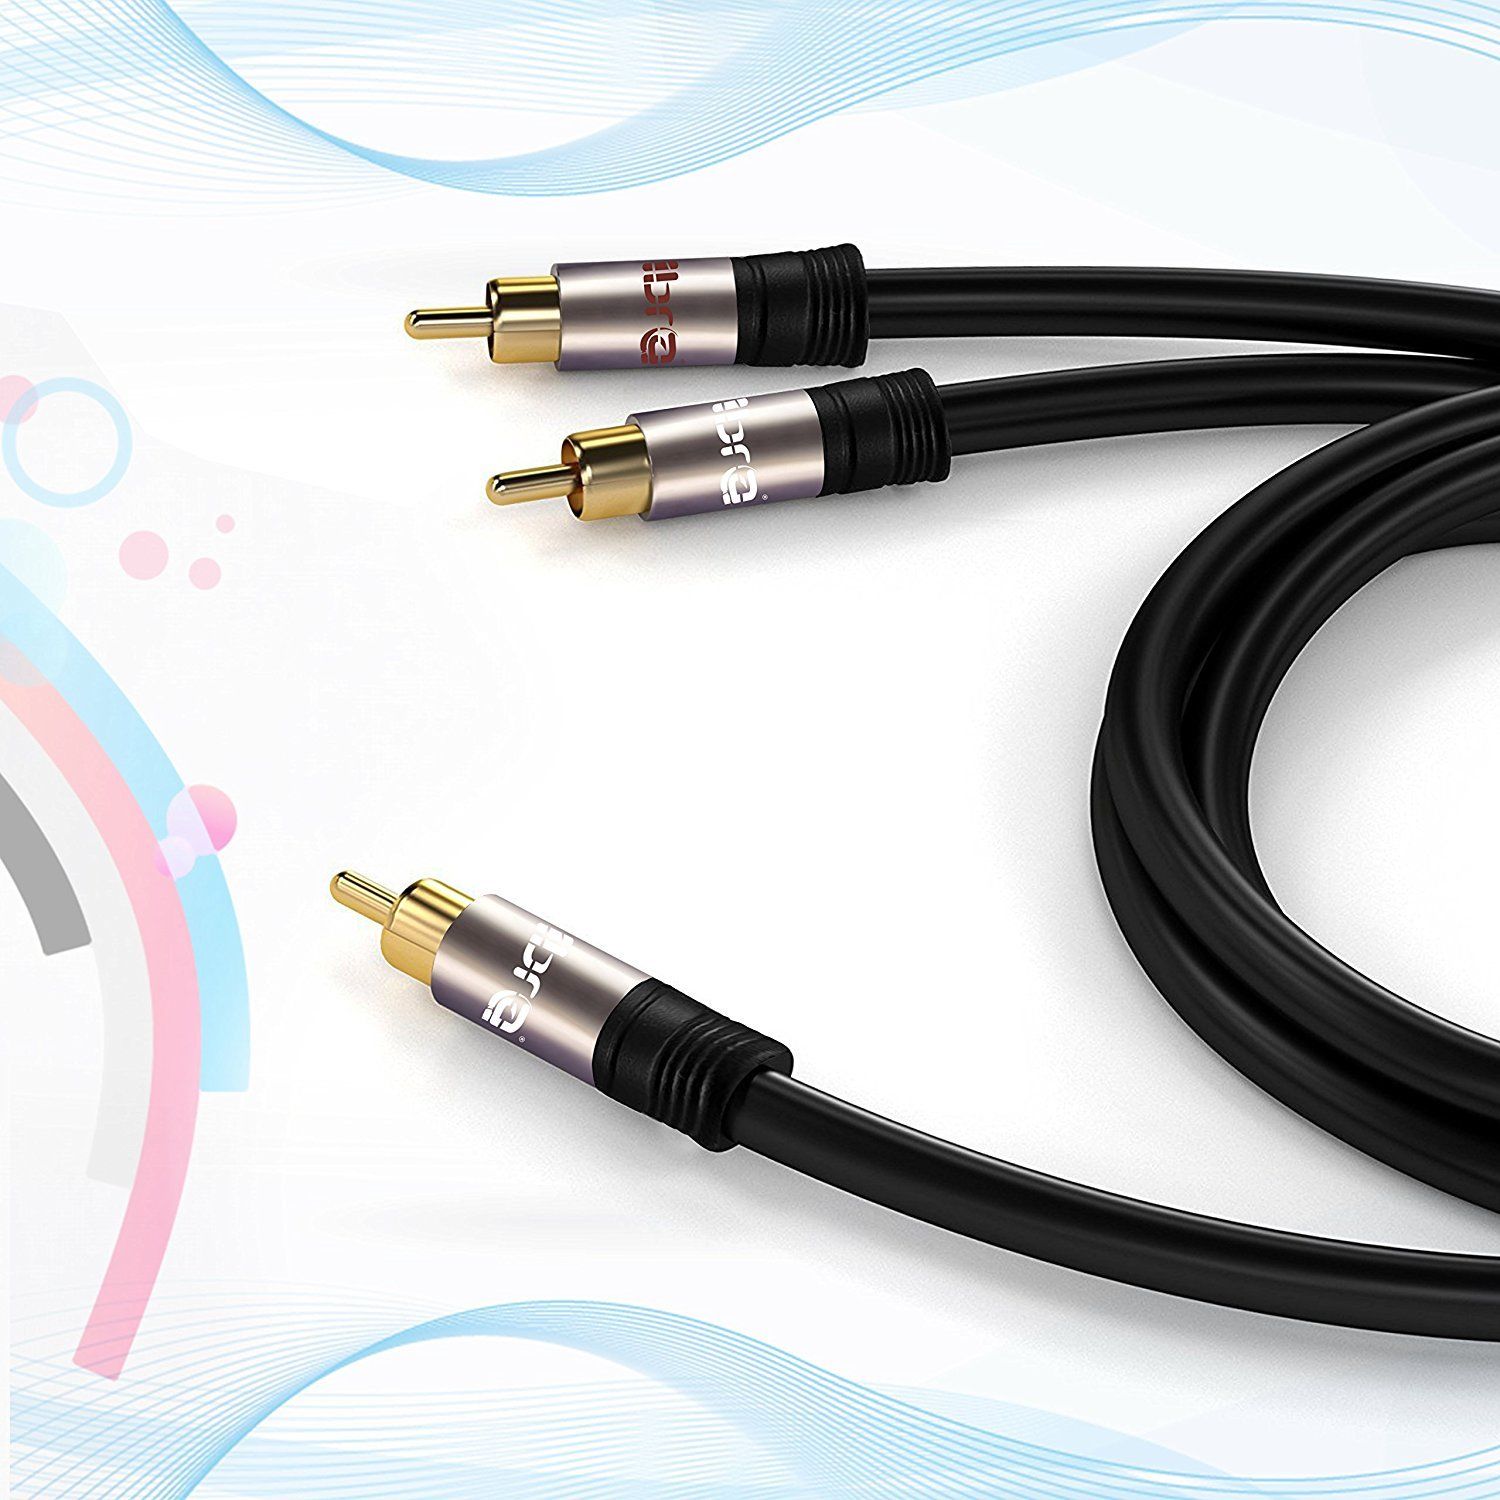 IBRA 3M Y Cable / Subwoofer Cable / Audio Cable / RCA Cable (1 x RCA to 2 x RCA) - GUN Metal Range